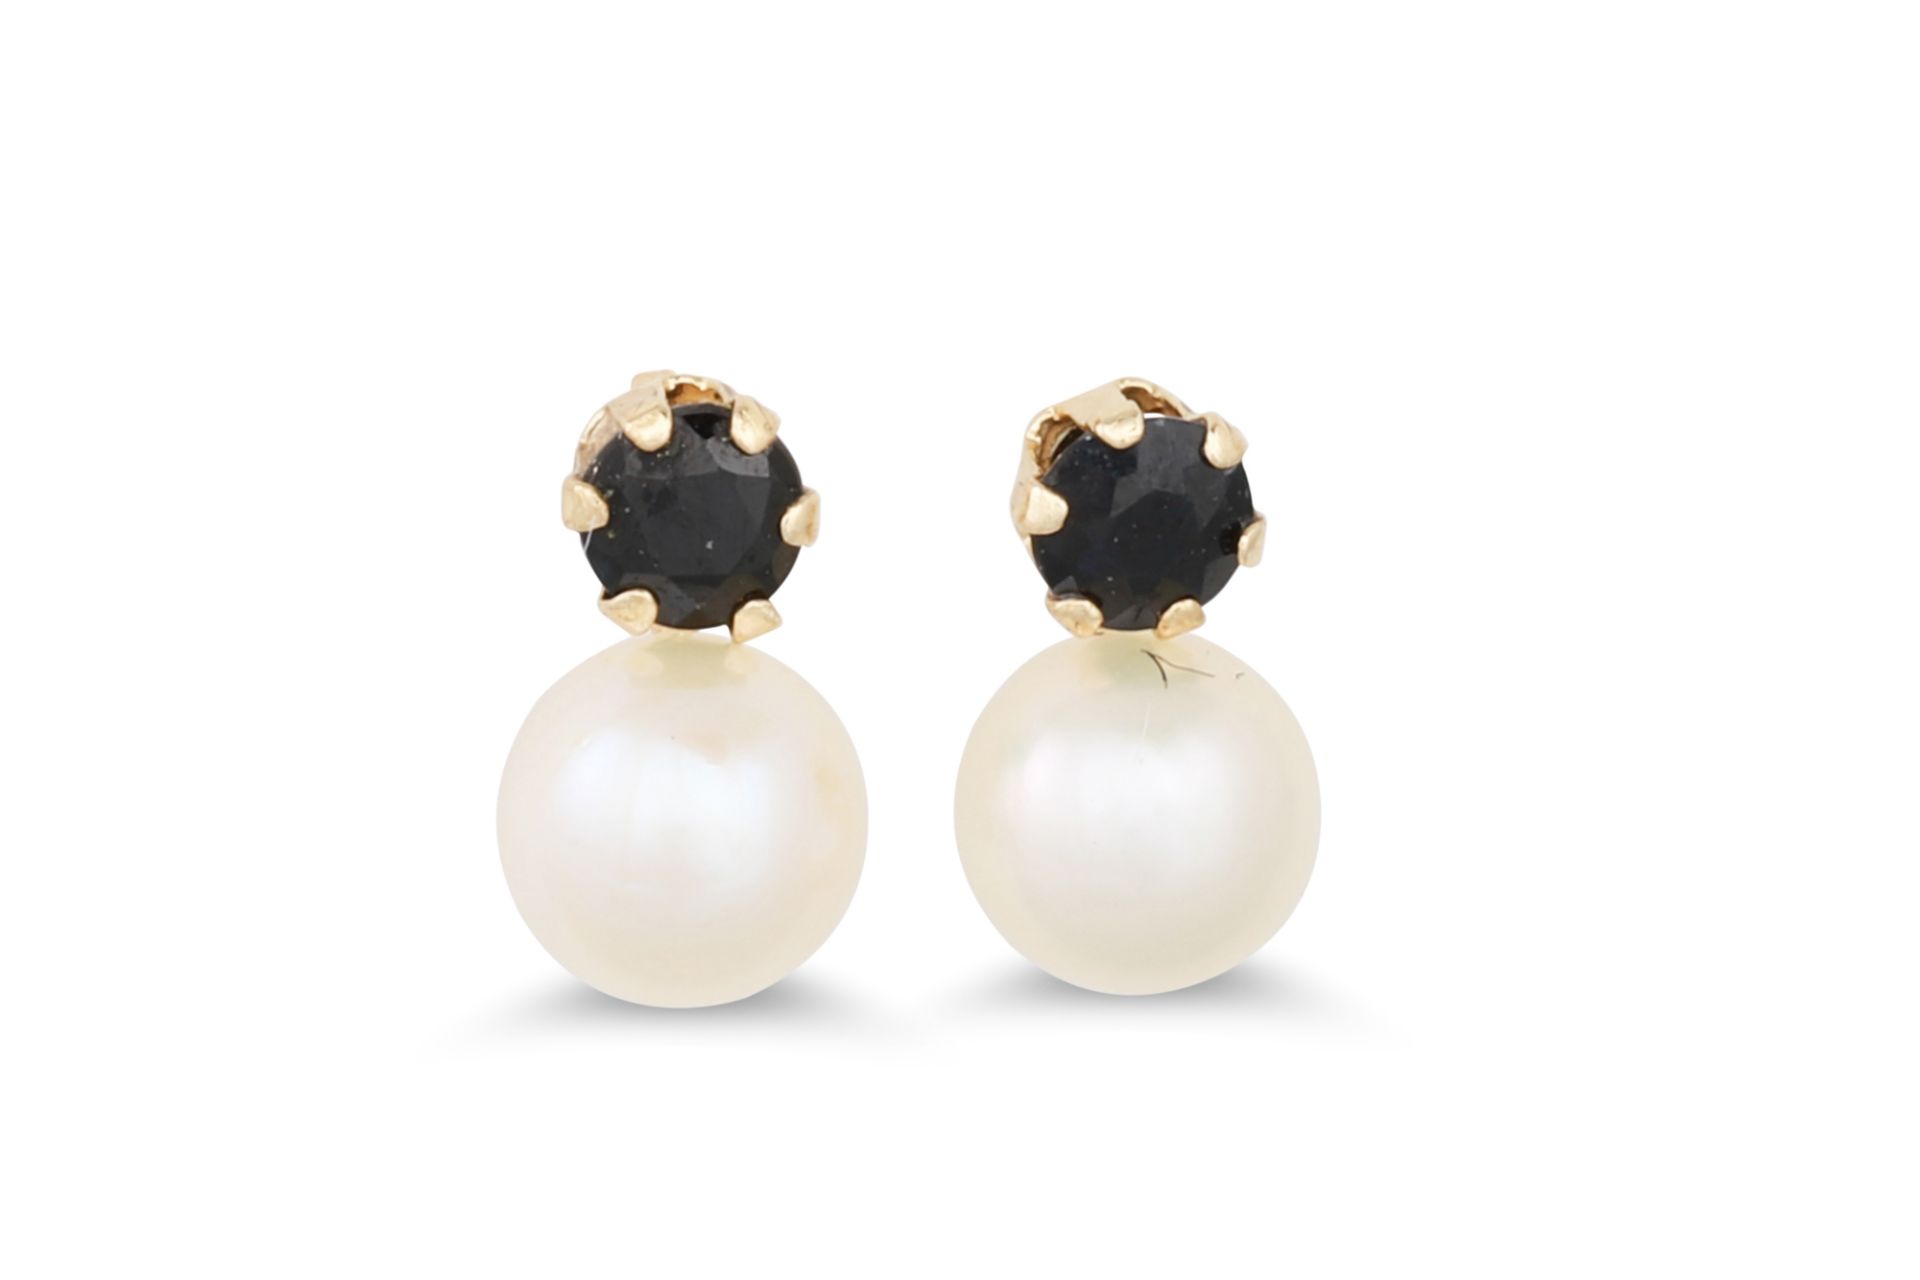 A PAIR OF CULTURED PEARL AND SAPPHIRE EARRINGS, mounted in yellow gold